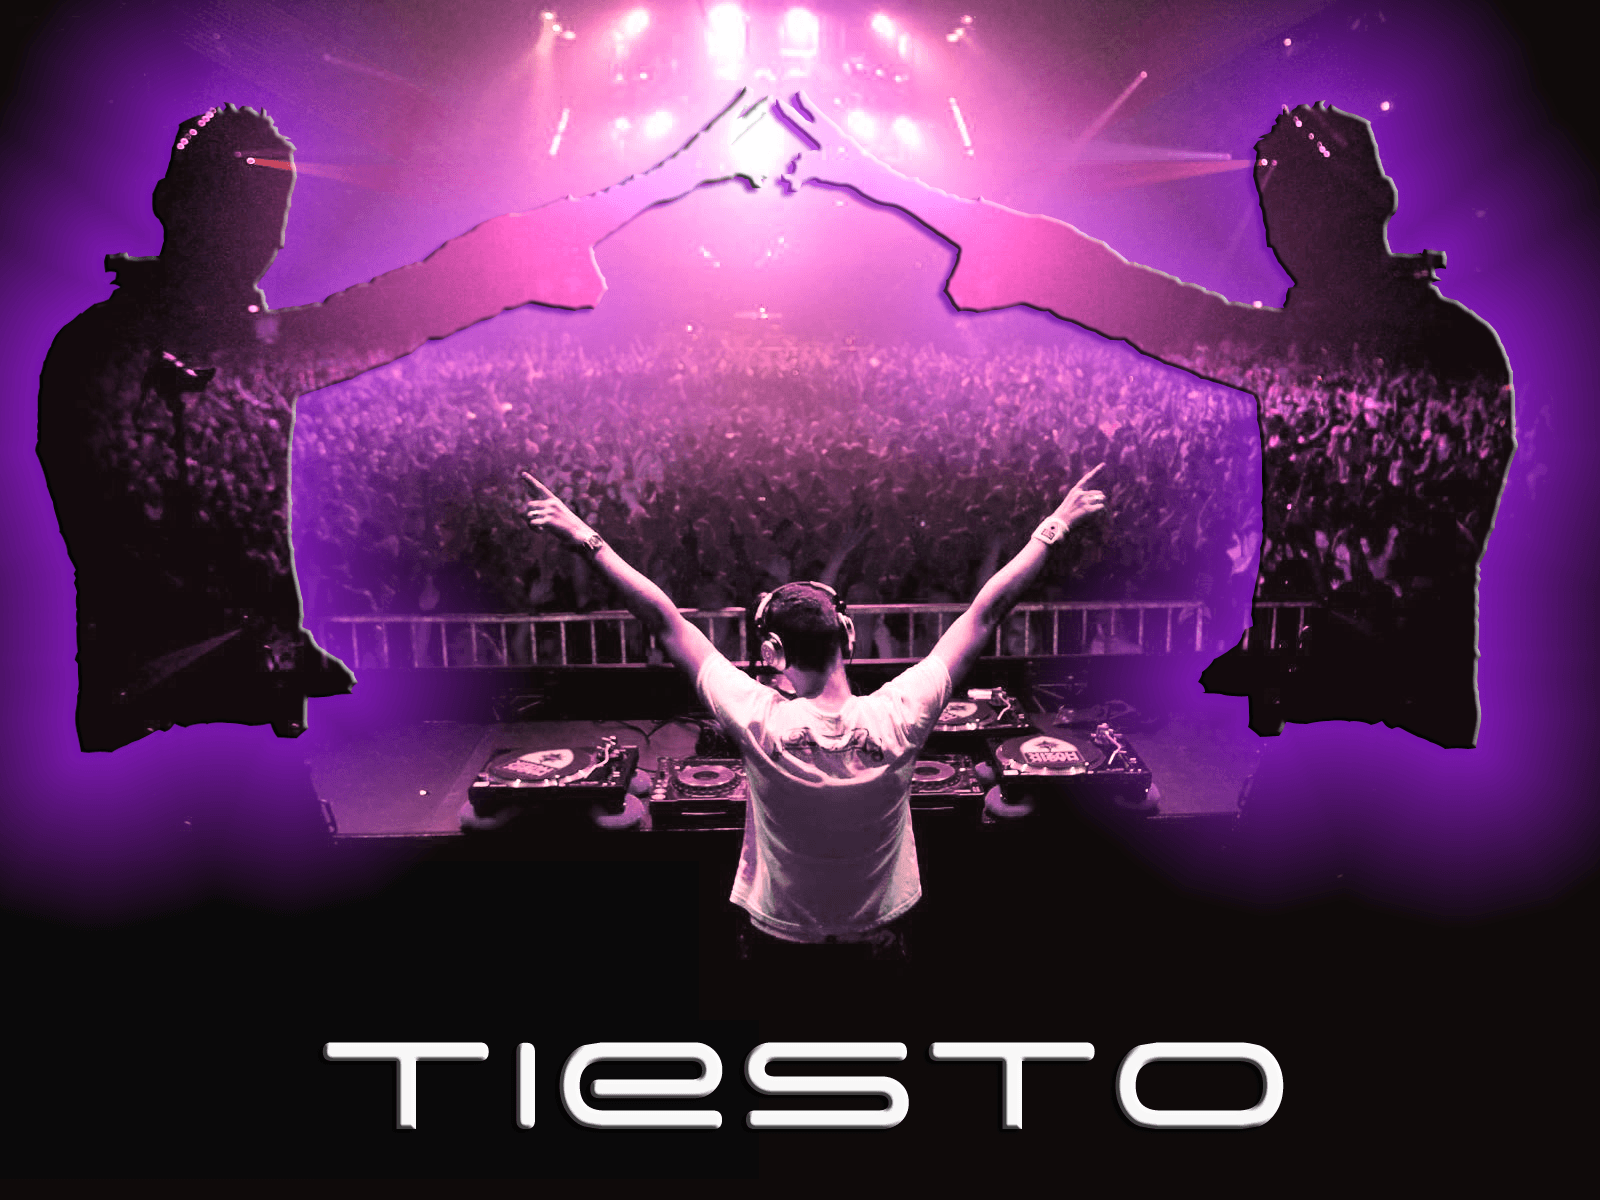 My First Tiesto Wallpaper By Addicted To Trance